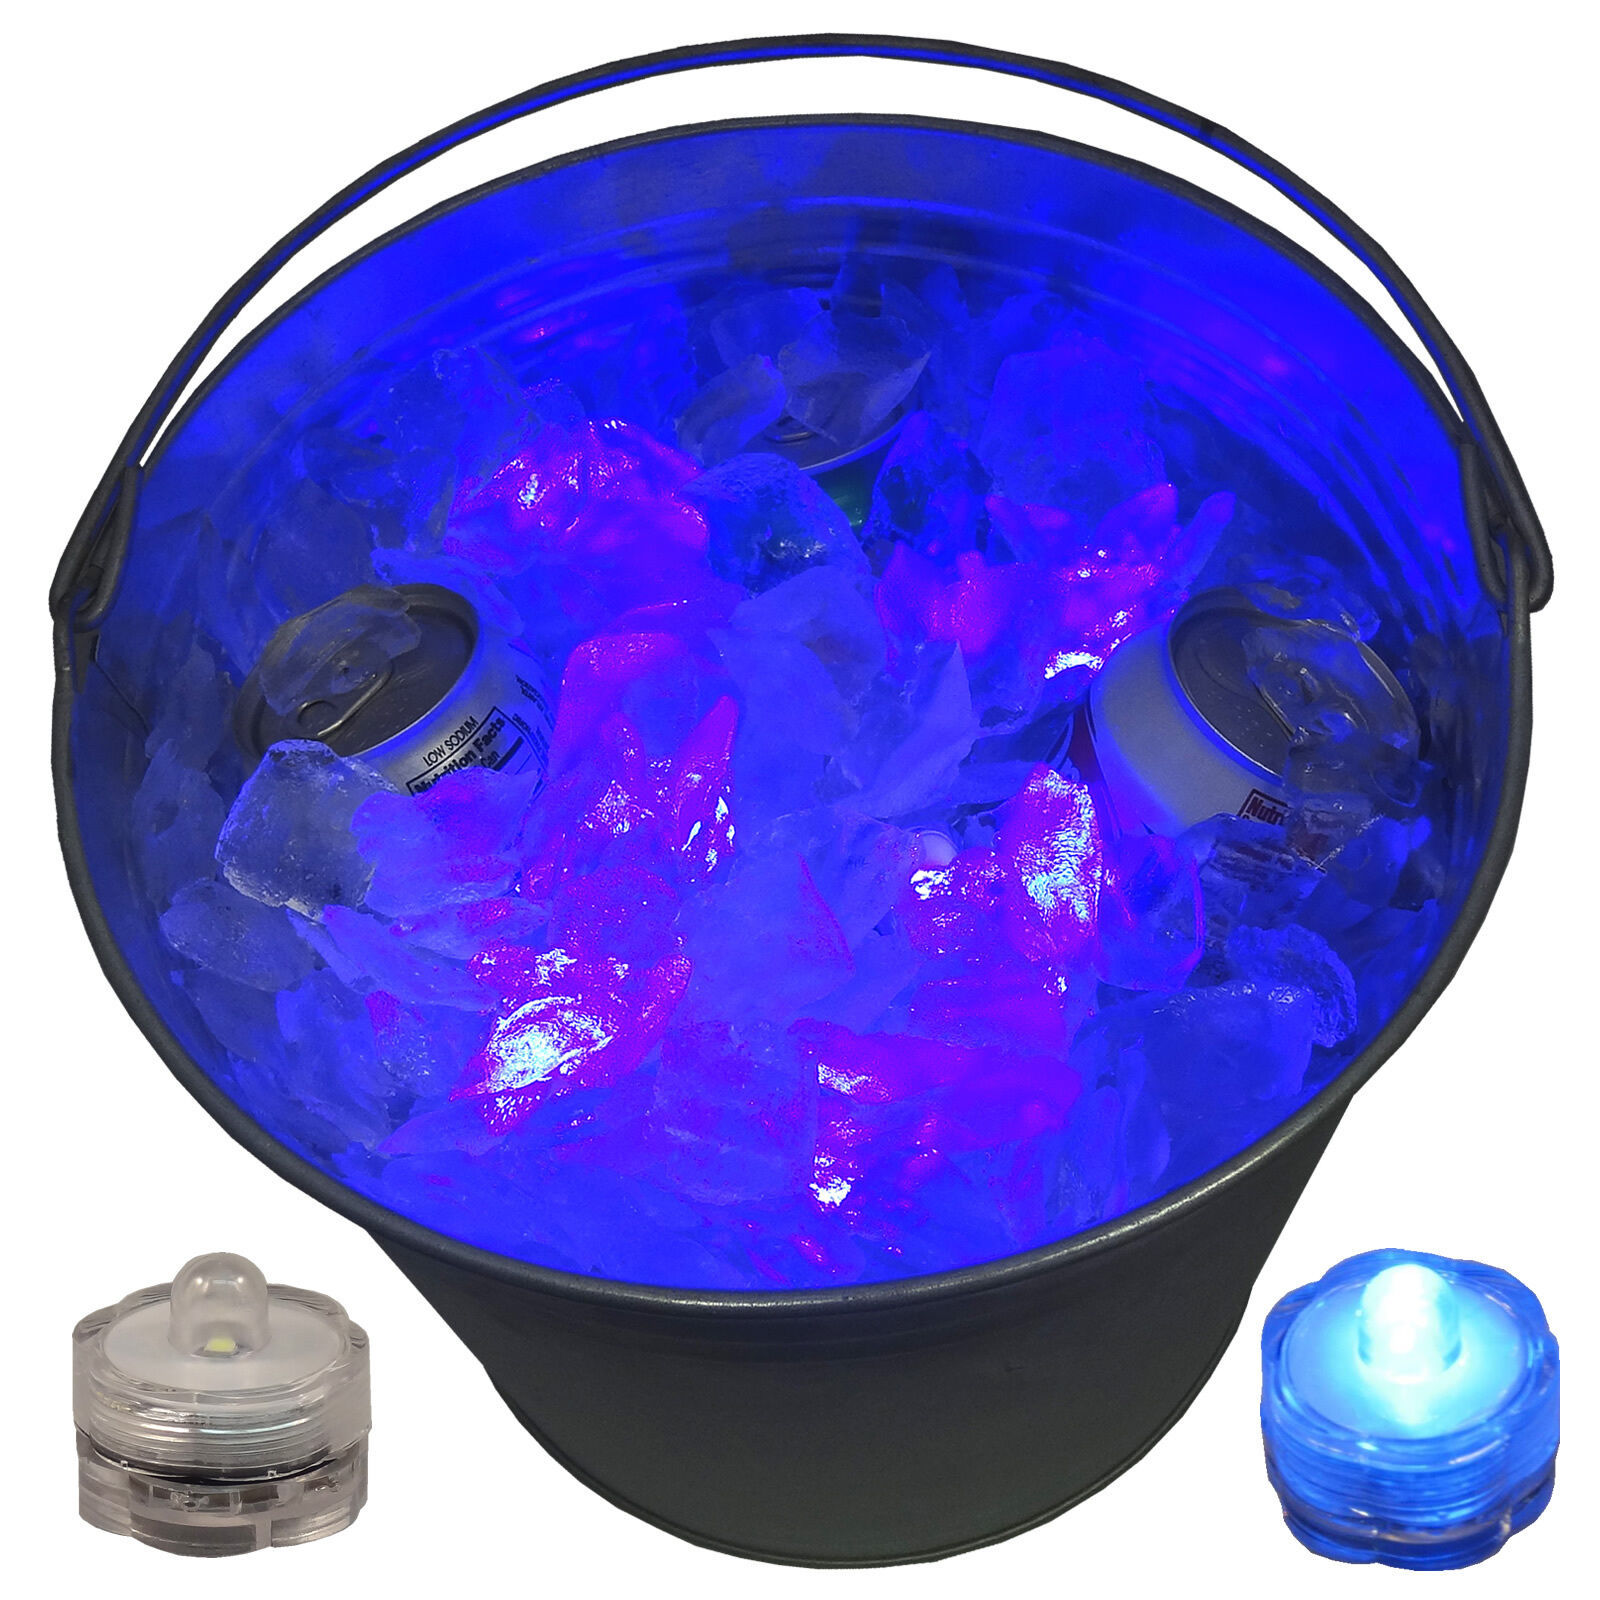 Primary image for Mardi Gras Fat Tuesday Party LED Submersible Beverage Ice Bucket Lights 24 Blue